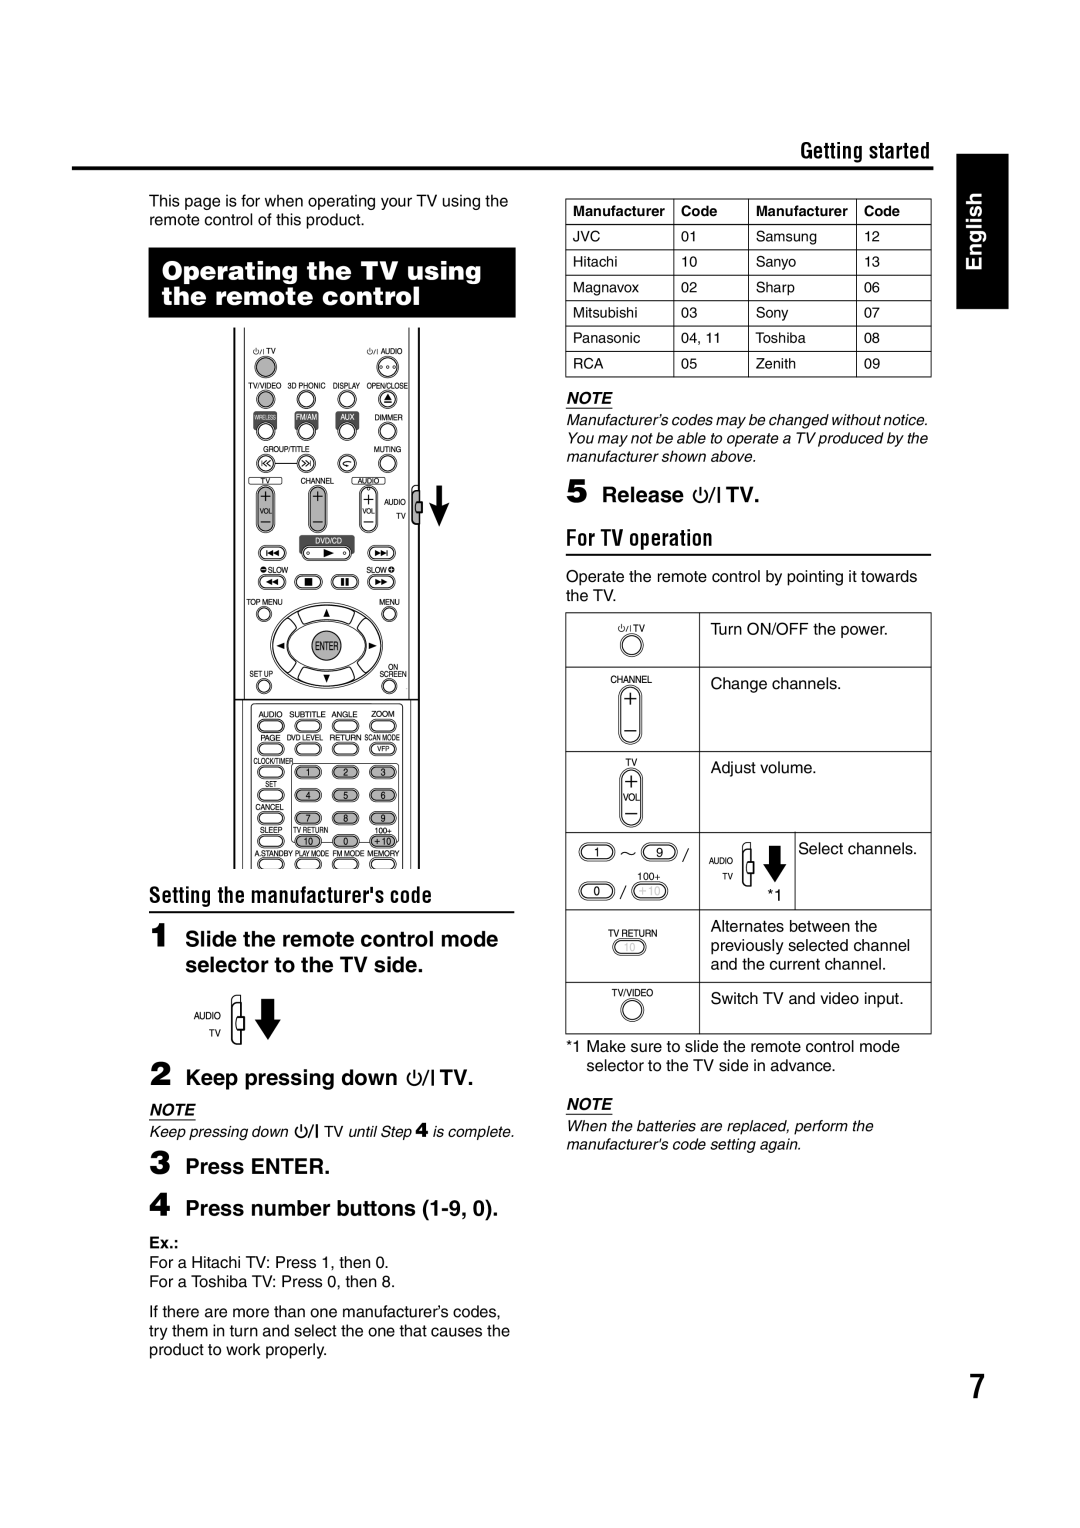 JVC GVT0144-005A Operating the TV using the remote control, Setting the manufacturers code, Keep pressing down TV, English 